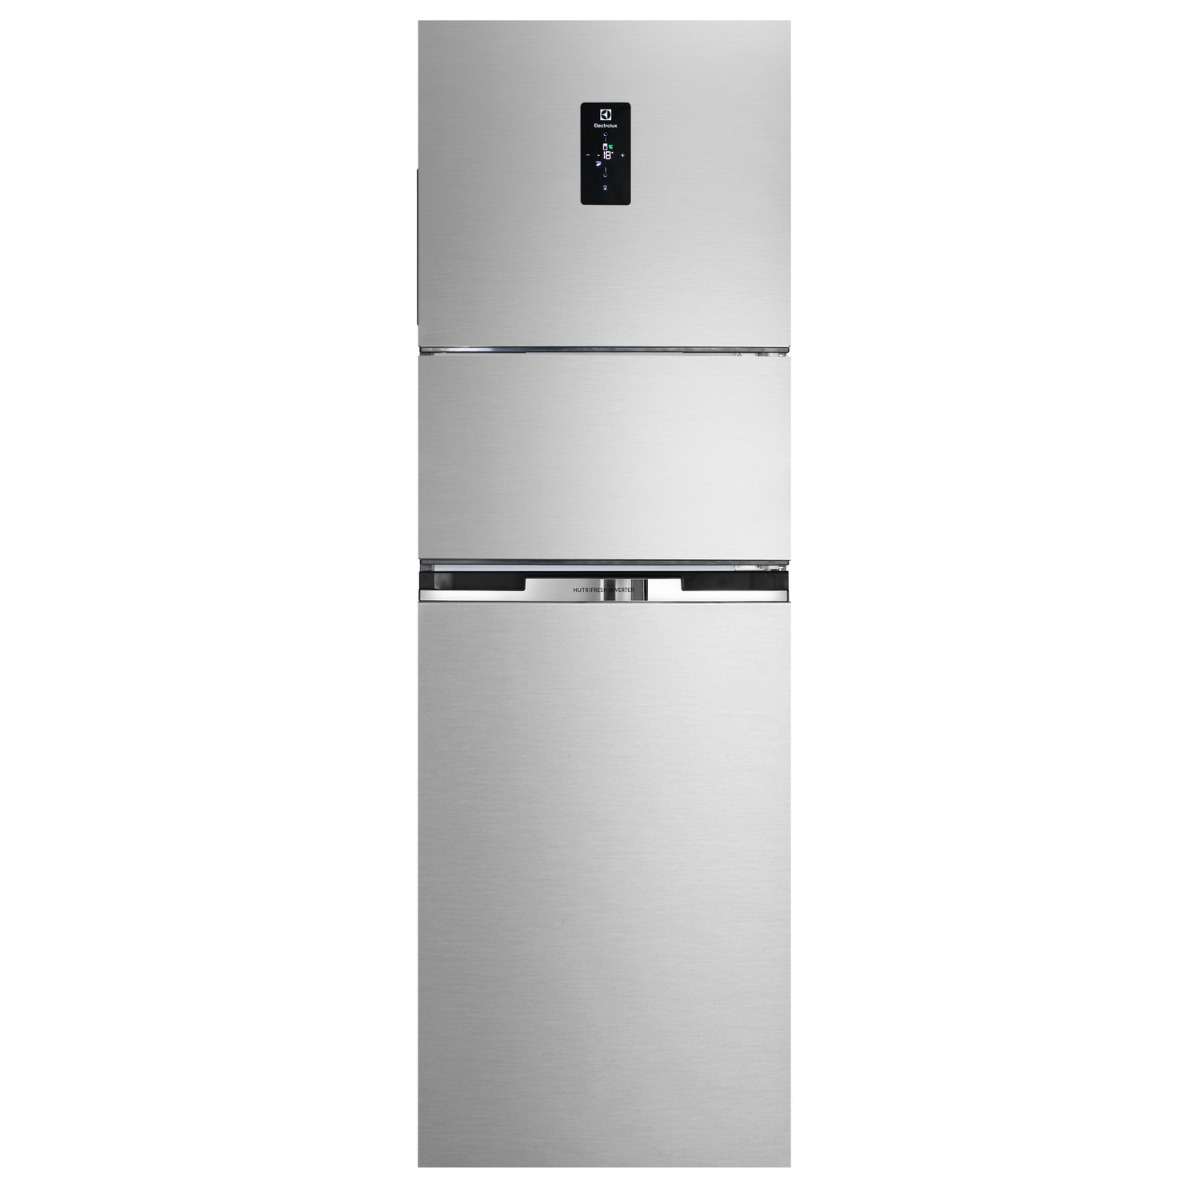 Electrolux 3 Doors Refrigerator (11.9 Cubic,Stainless steel) EME3700H-ARTH